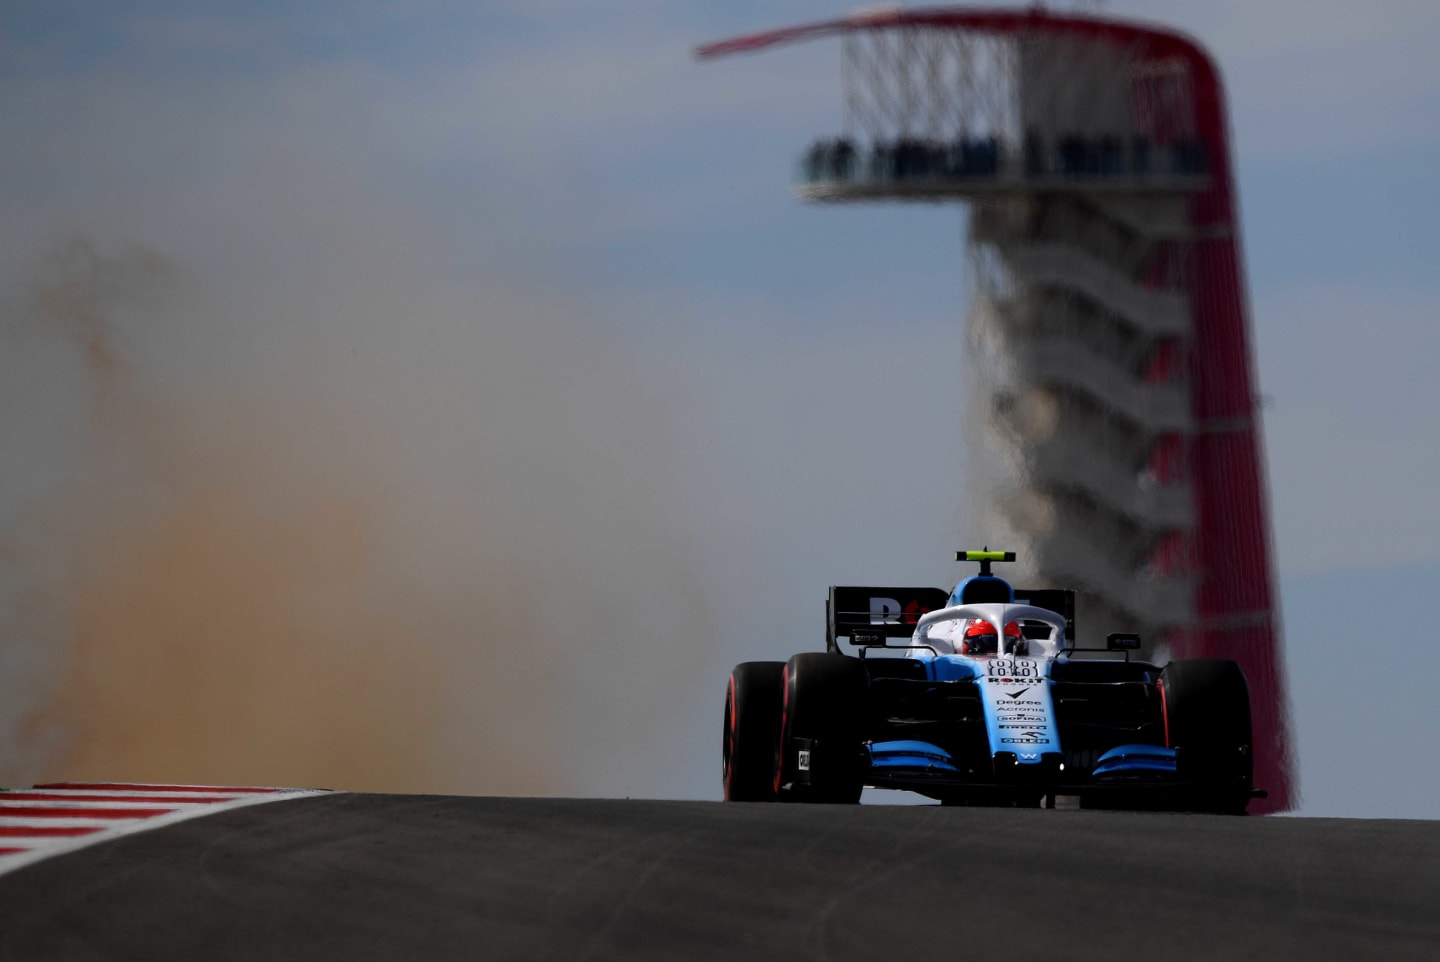 AUSTIN, TEXAS - NOVEMBER 02: Robert Kubica of Poland driving the (88) Rokit Williams Racing FW42 Mercedes on track during final practice for the F1 Grand Prix of USA at Circuit of The Americas on November 02, 2019 in Austin, Texas. (Photo by Clive Mason/Getty Images)